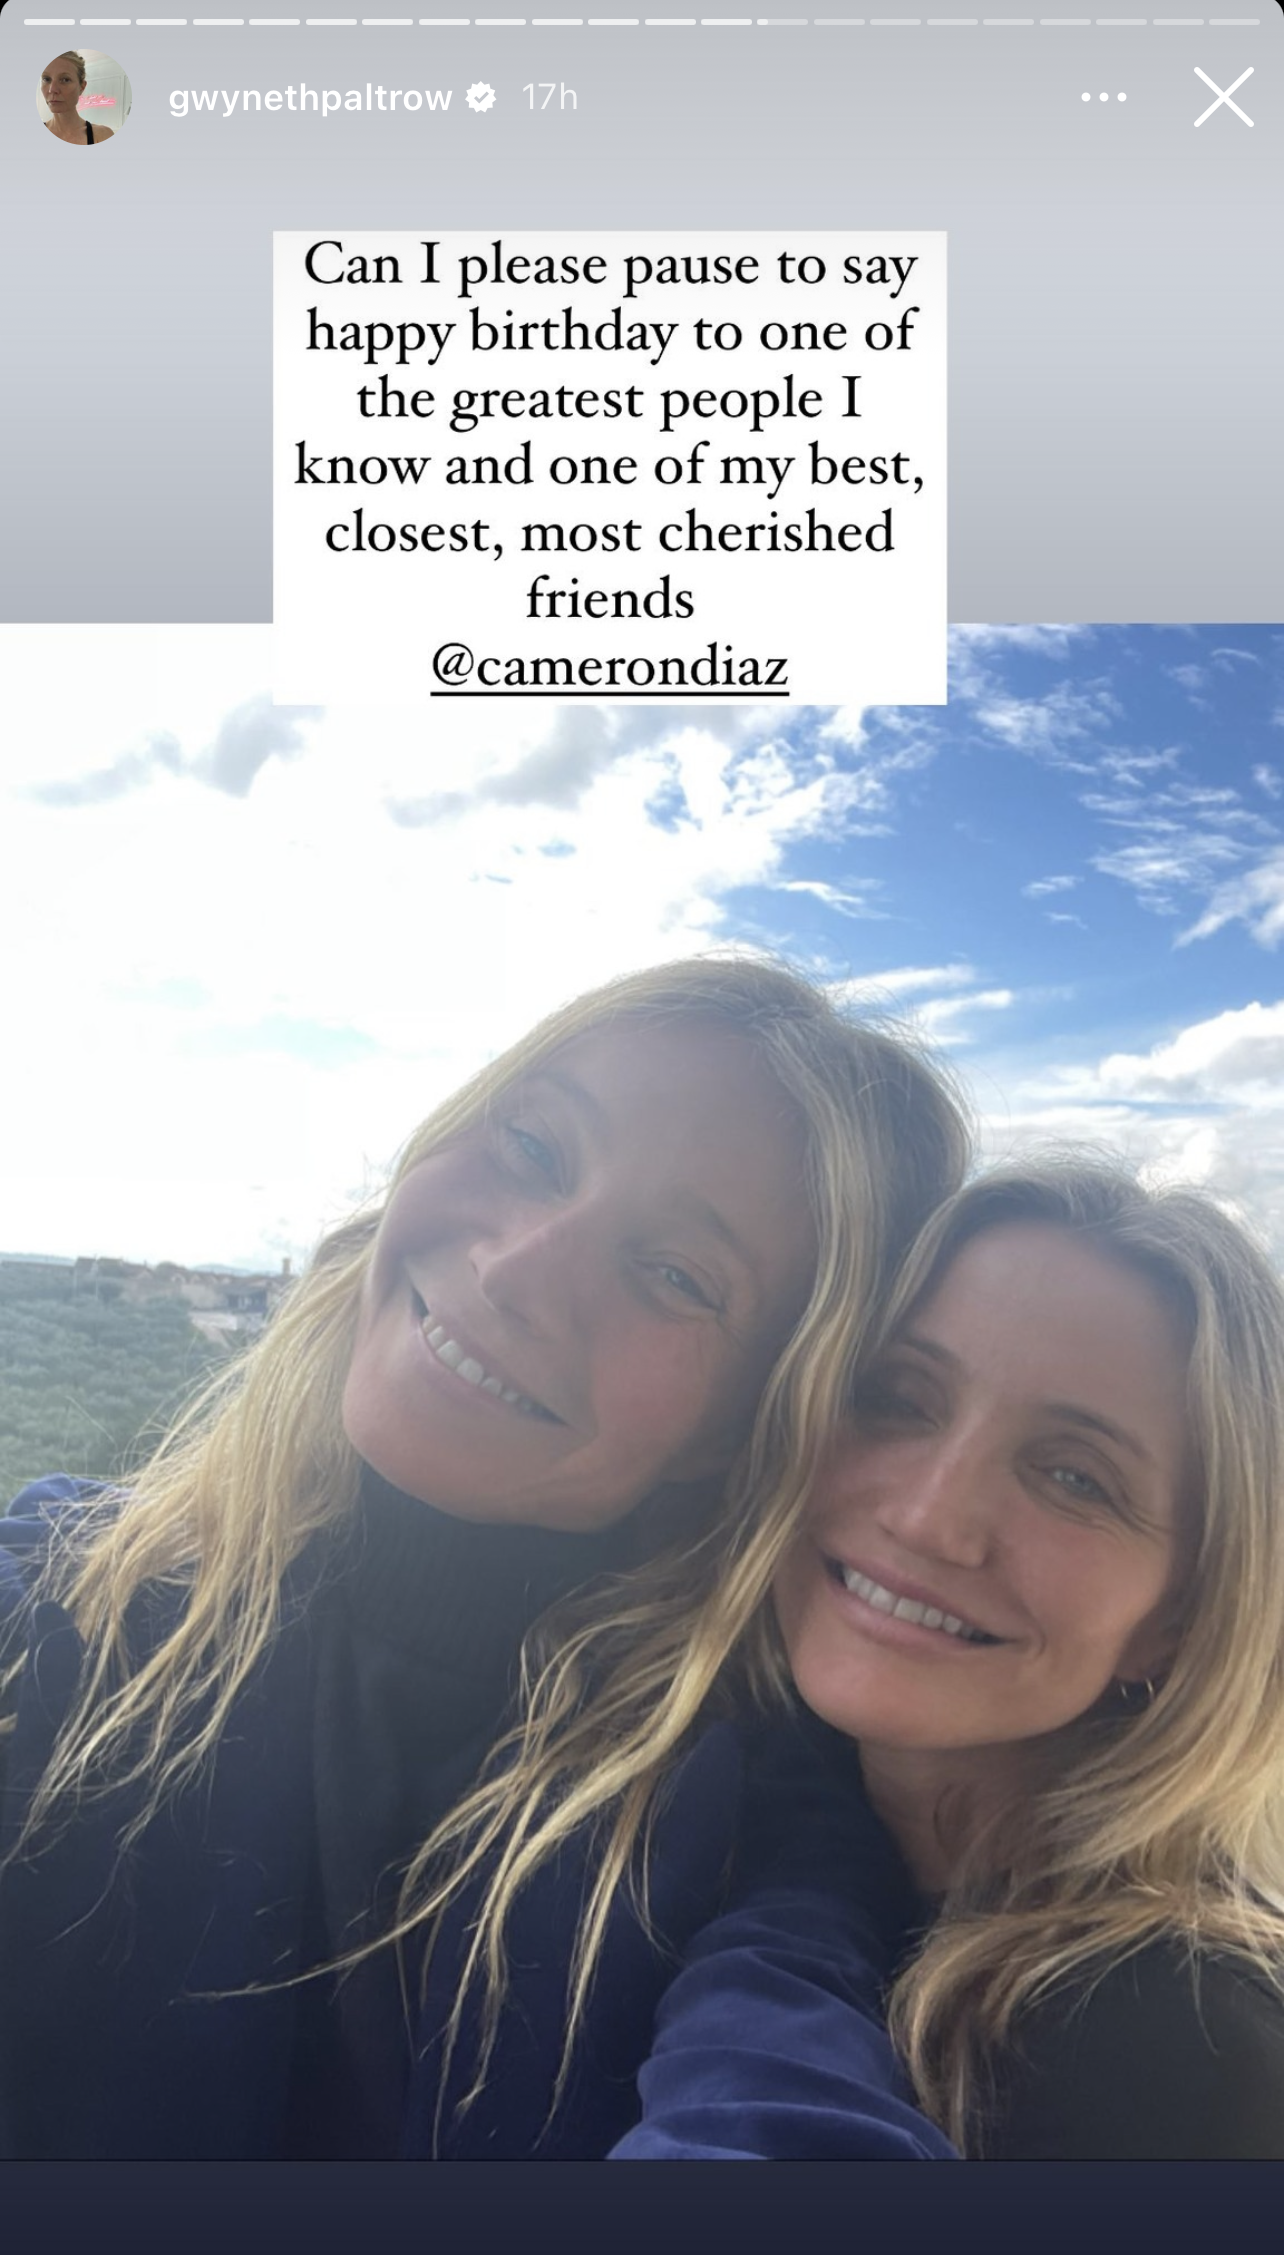 Screenshot of Gwyneth and Cameron during the live with the caption &quot;Can I please pause to say happy birthday to one of the greatest people I know and one of my best, closest, most cherished friends @camerondiaz&quot;